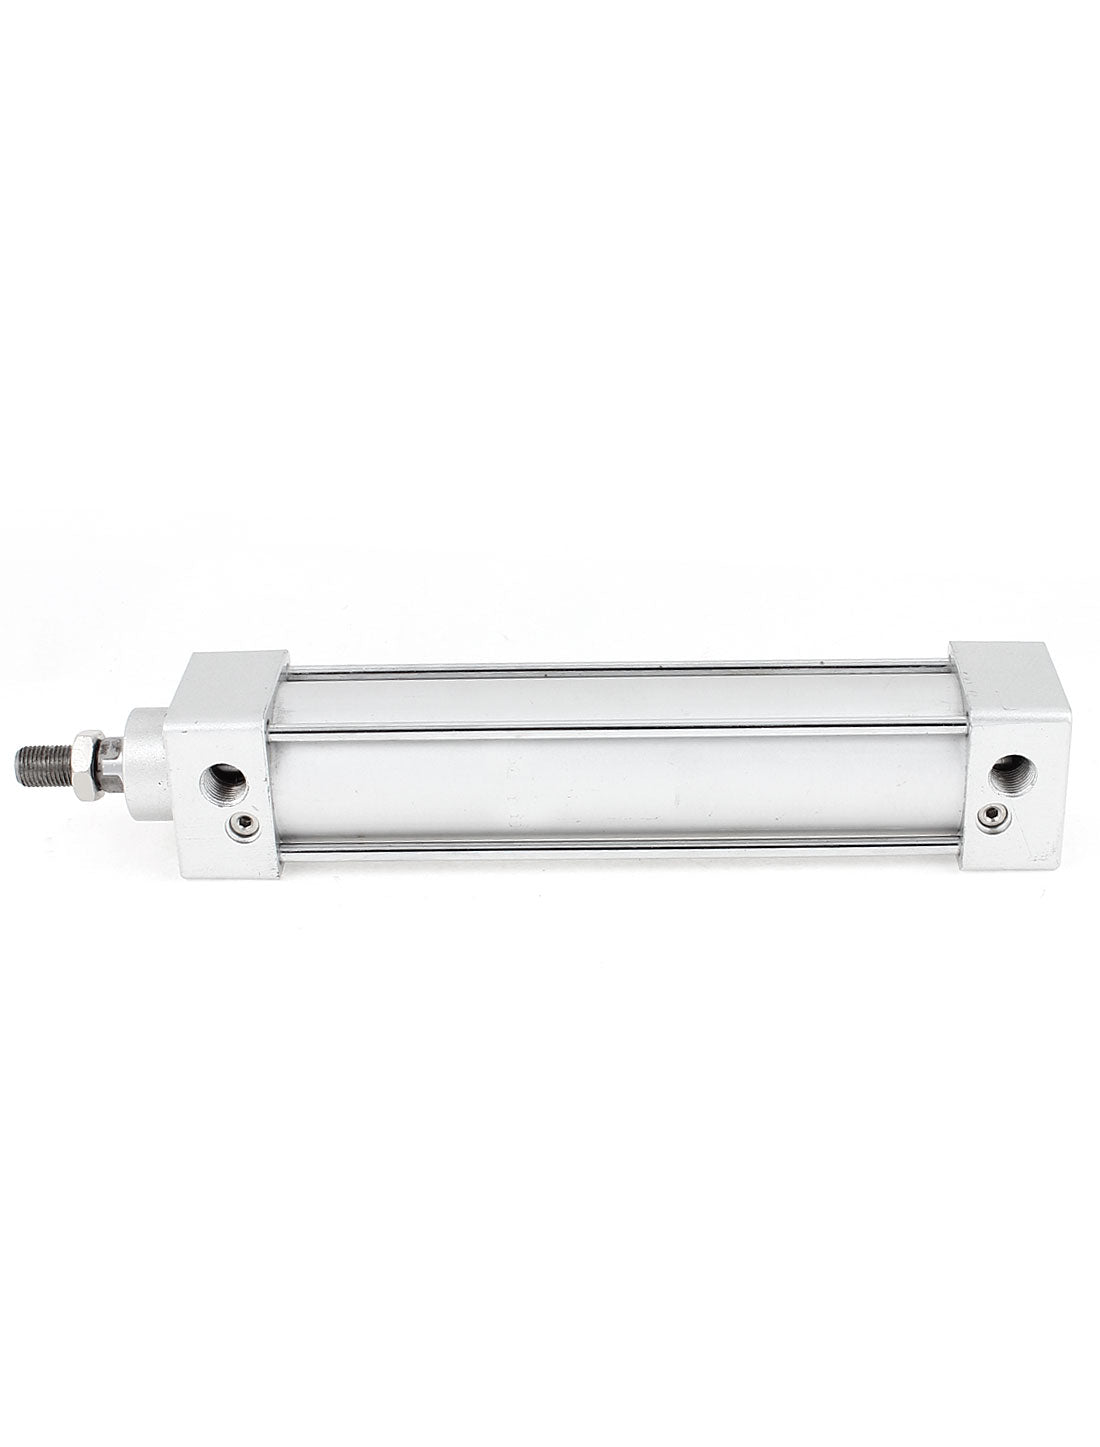 uxcell Uxcell 40mm Bore 150mm Stroke Single Rod Dual Action Pneumatic Air Cylinder SC40x150